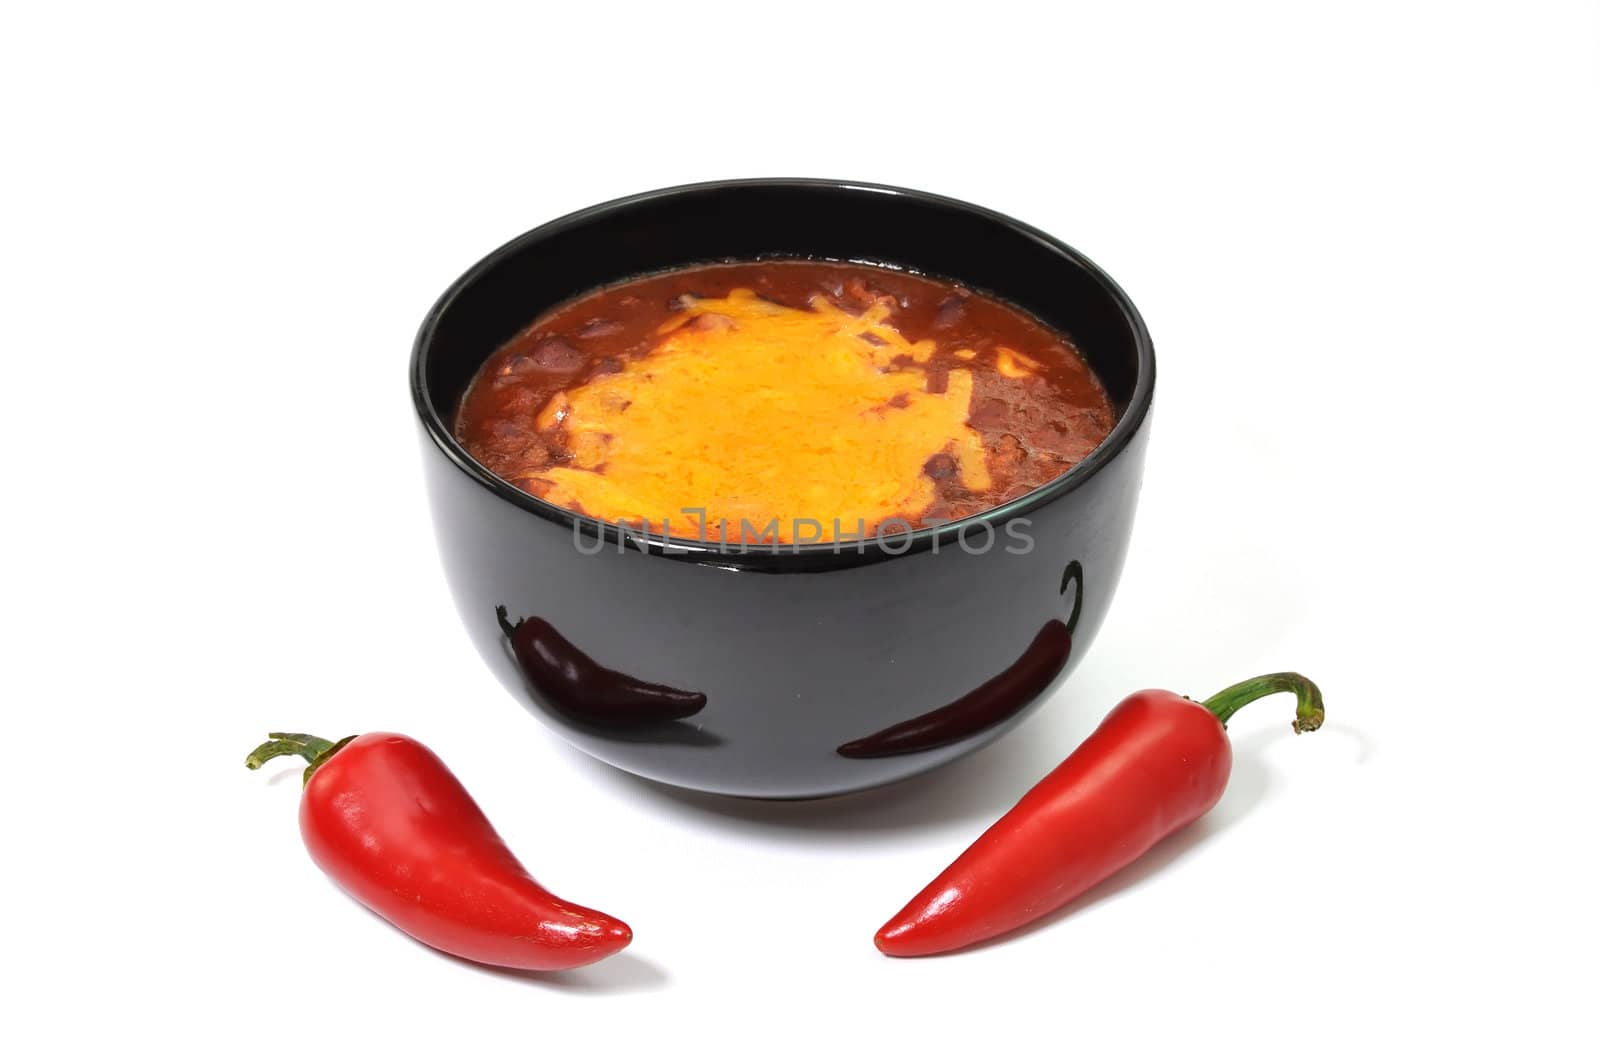 Bowl of chili with melted cheese and red cayenne peppers.  Isolated on white background.